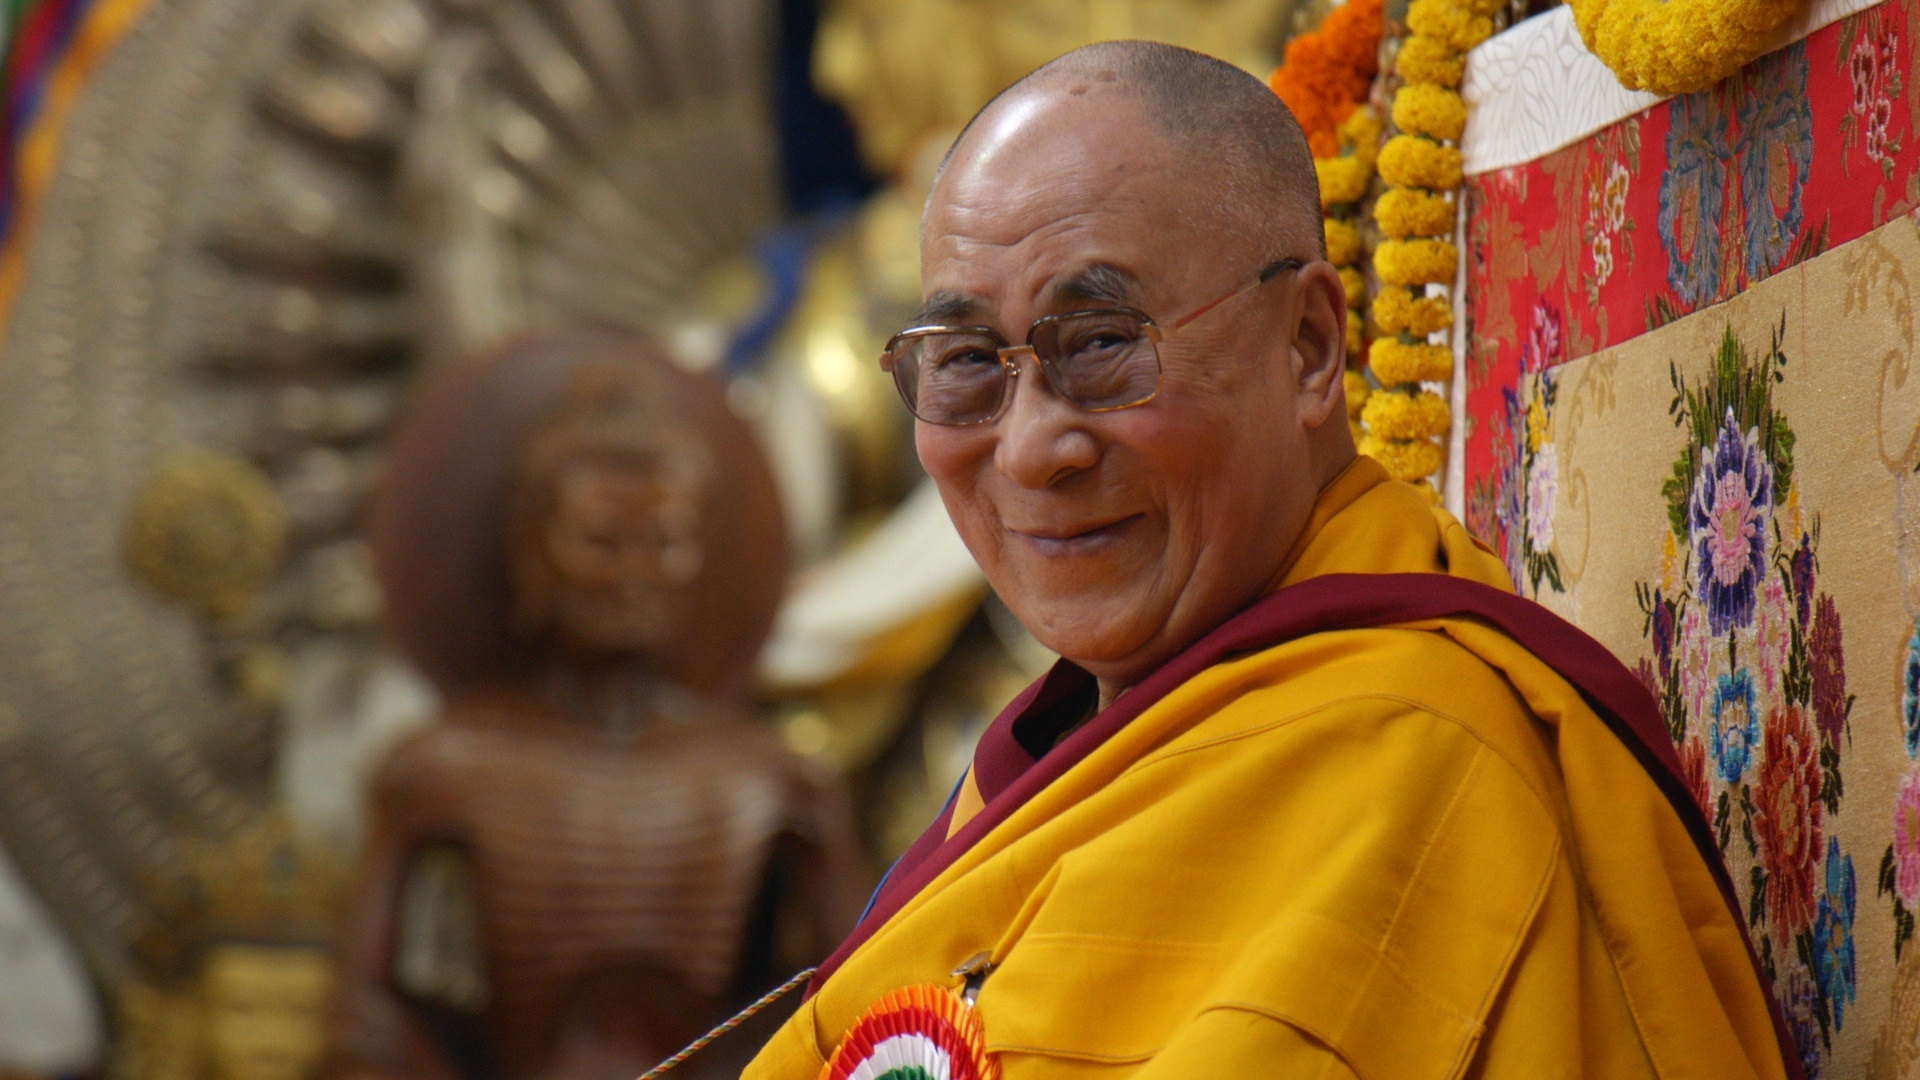 Dalai Lama: The author of "The Art of Happiness" and "Beyond Religion: Ethics for a Whole World". 1920x1080 Full HD Background.